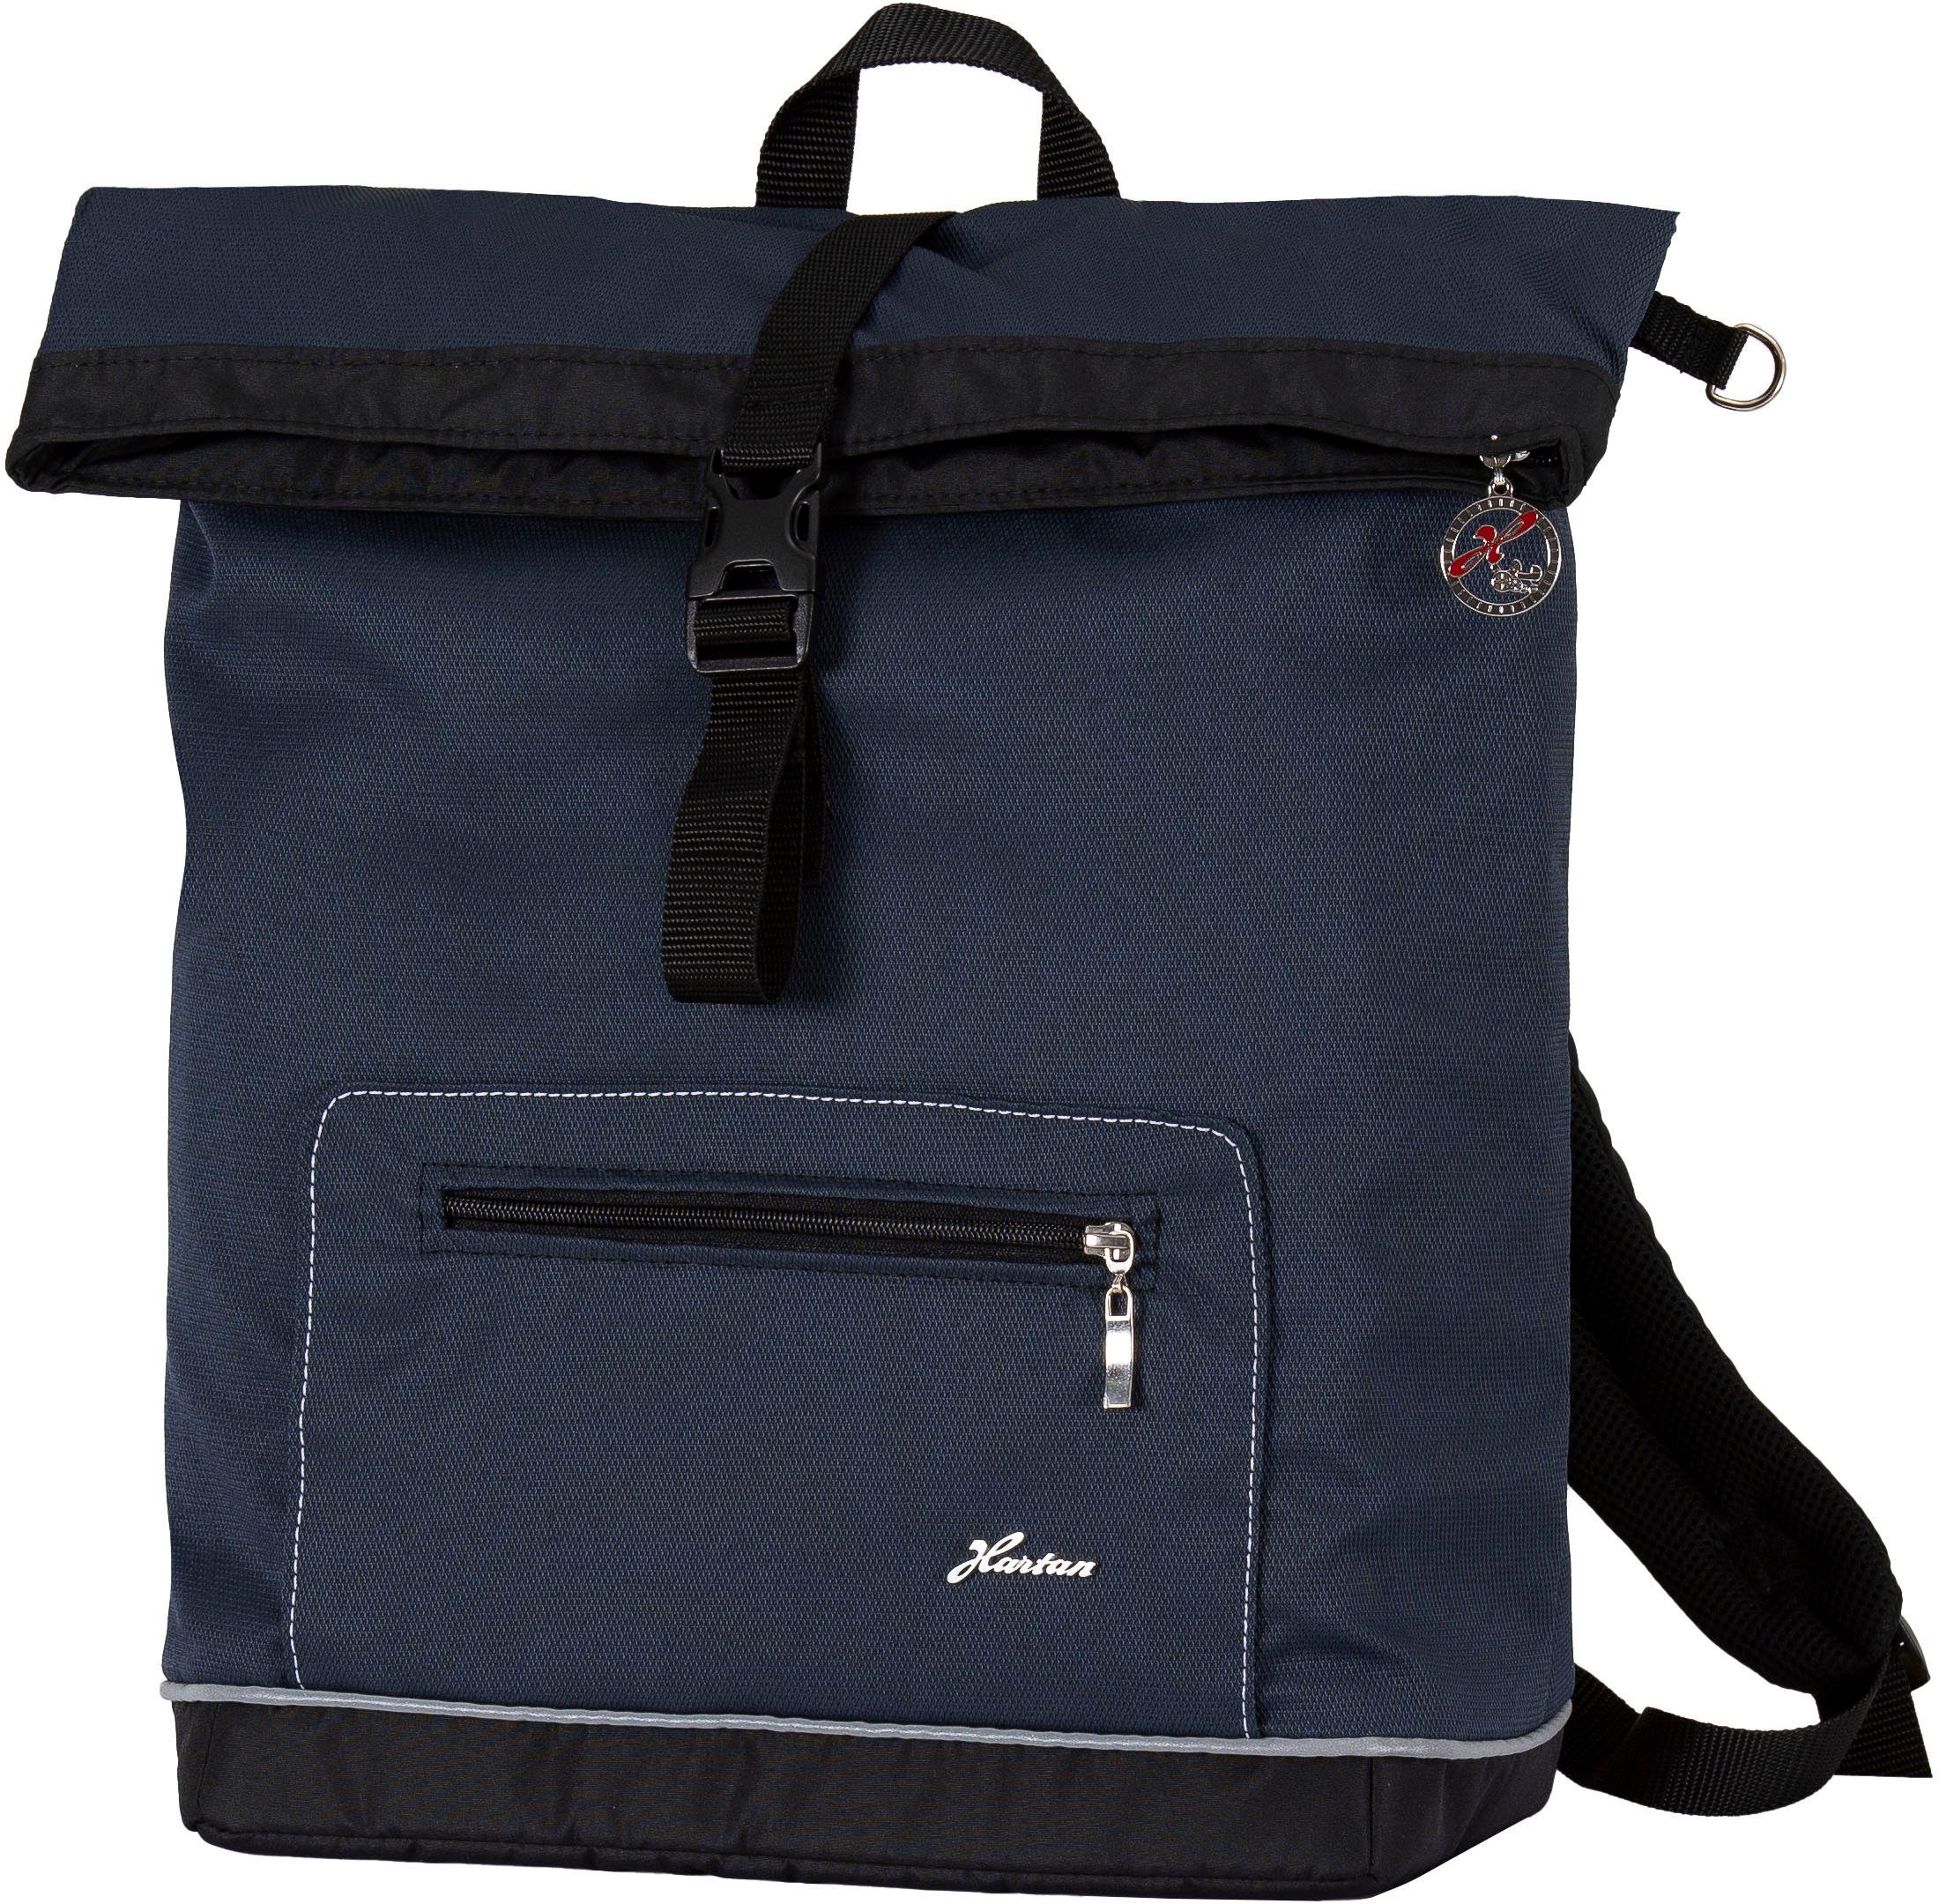 - navy stripes Casual Hartan Wickelrucksack bag Collection, Germany Space Made in Thermofach; mit